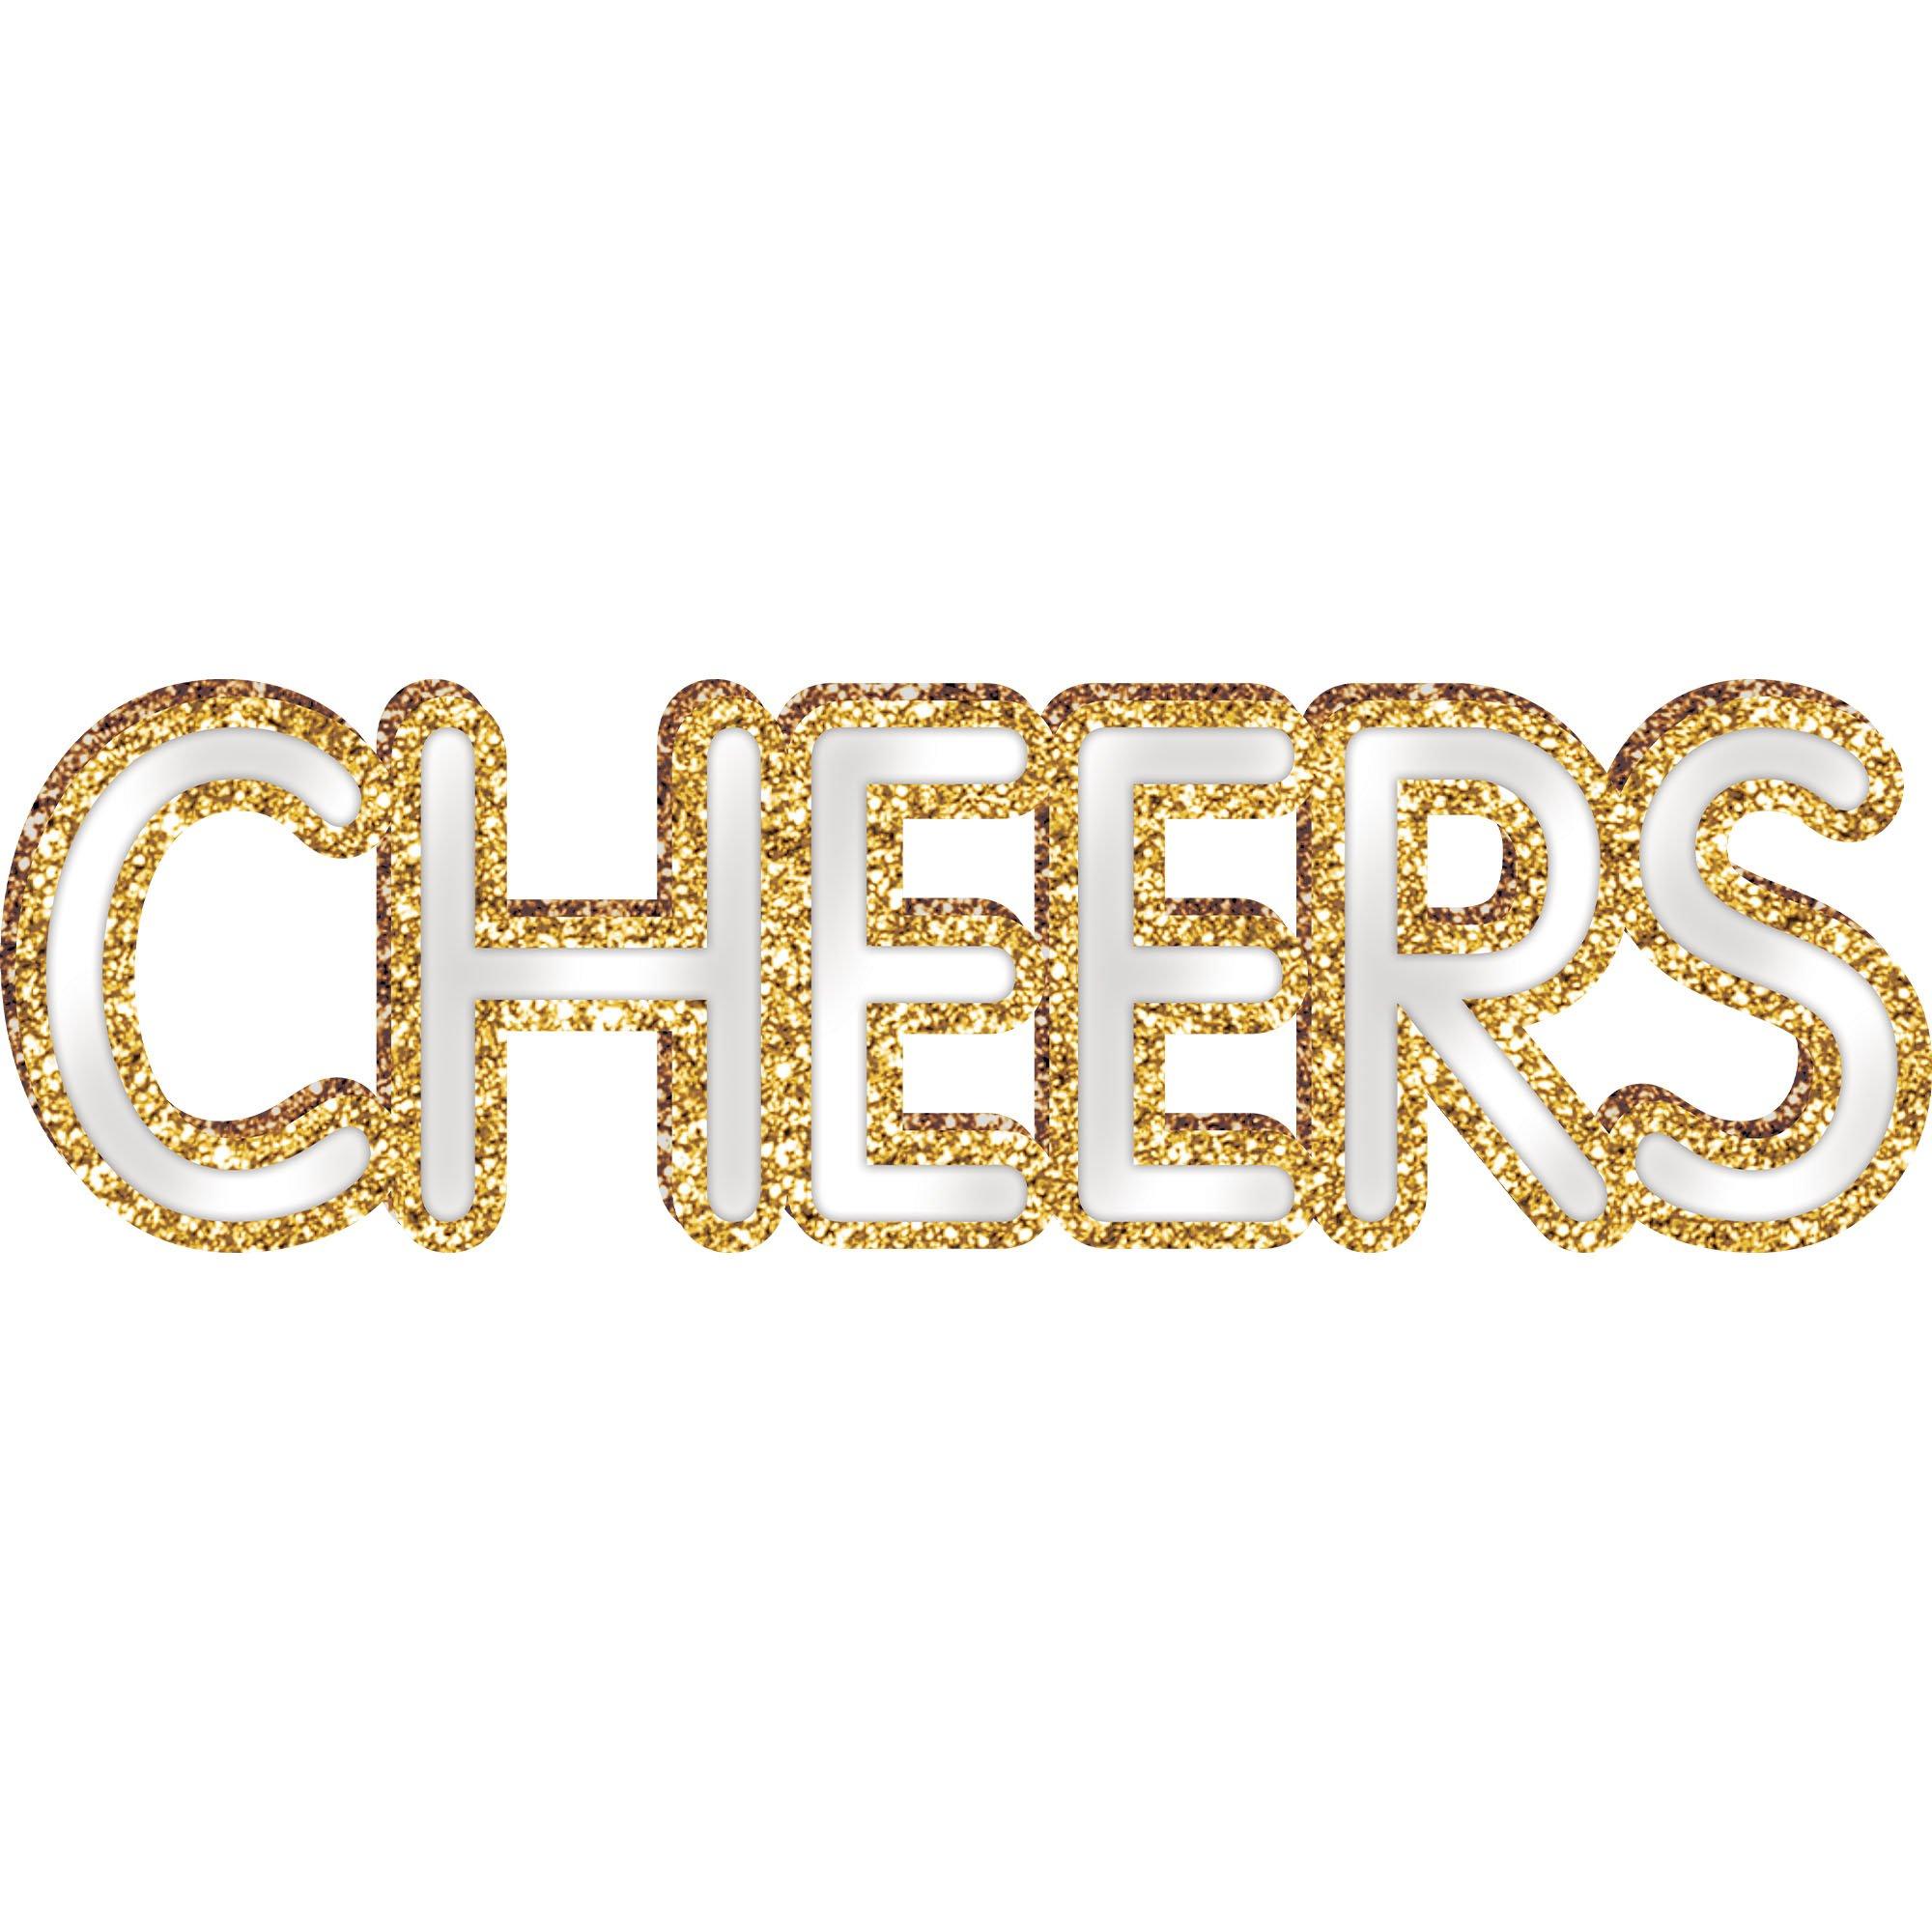 Mirrored & Gold Glitter Cheers Standing MDF Sign, 15.5in x 4.5in